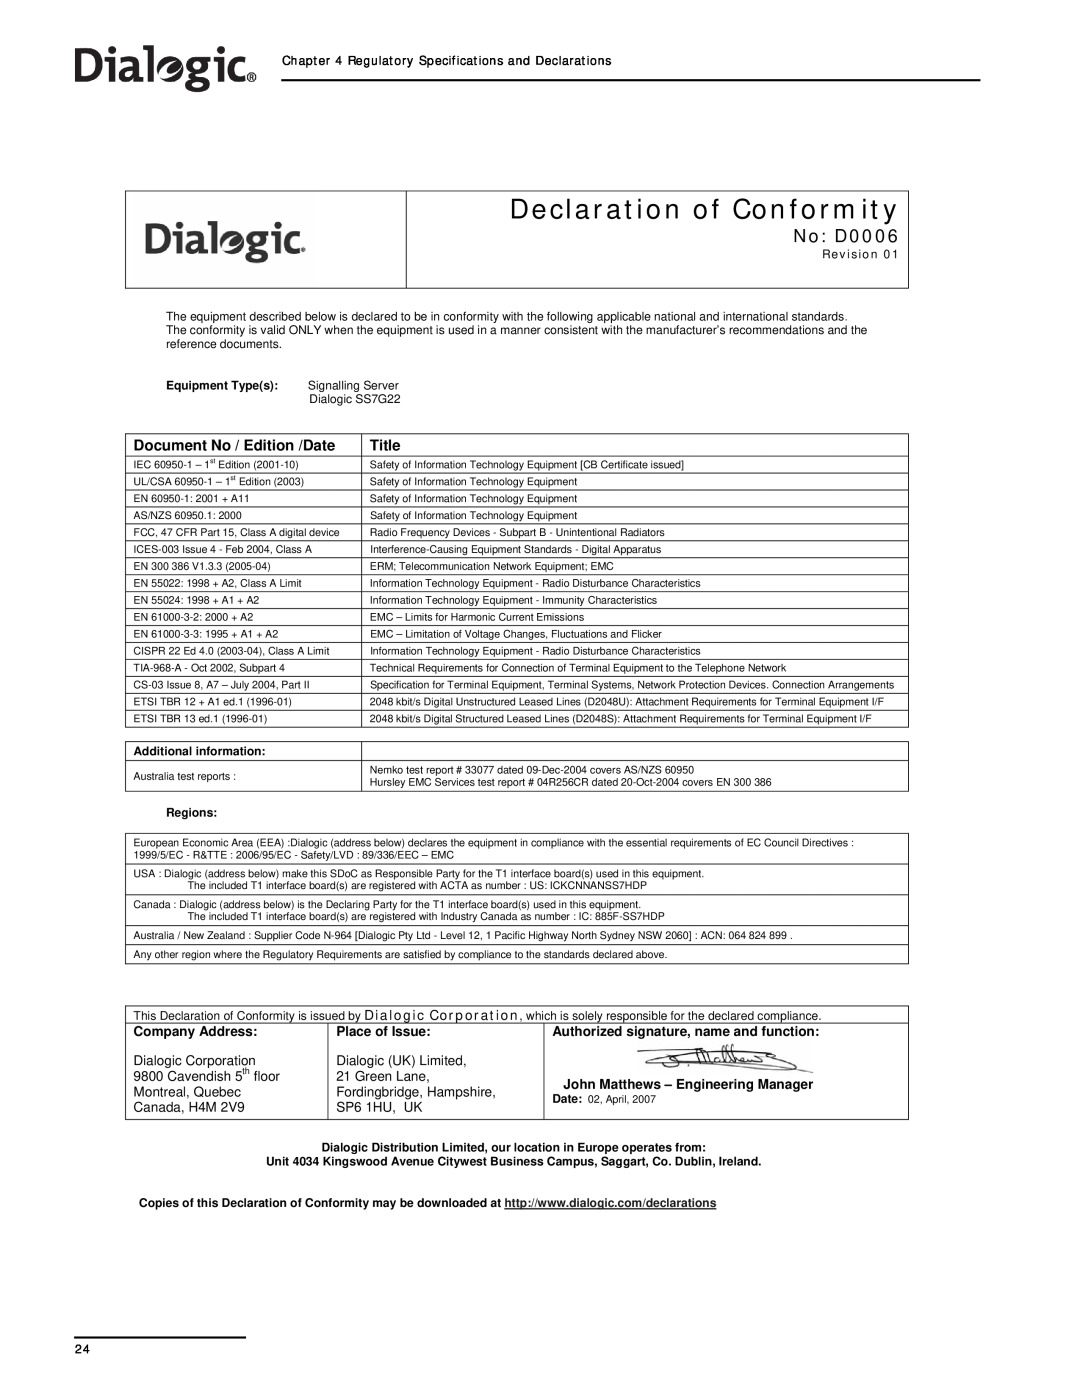 Dialogic SS7G21 No D0006, Declaration of Conformity, Document No / Edition /Date, Title, Company Address, Place of Issue 